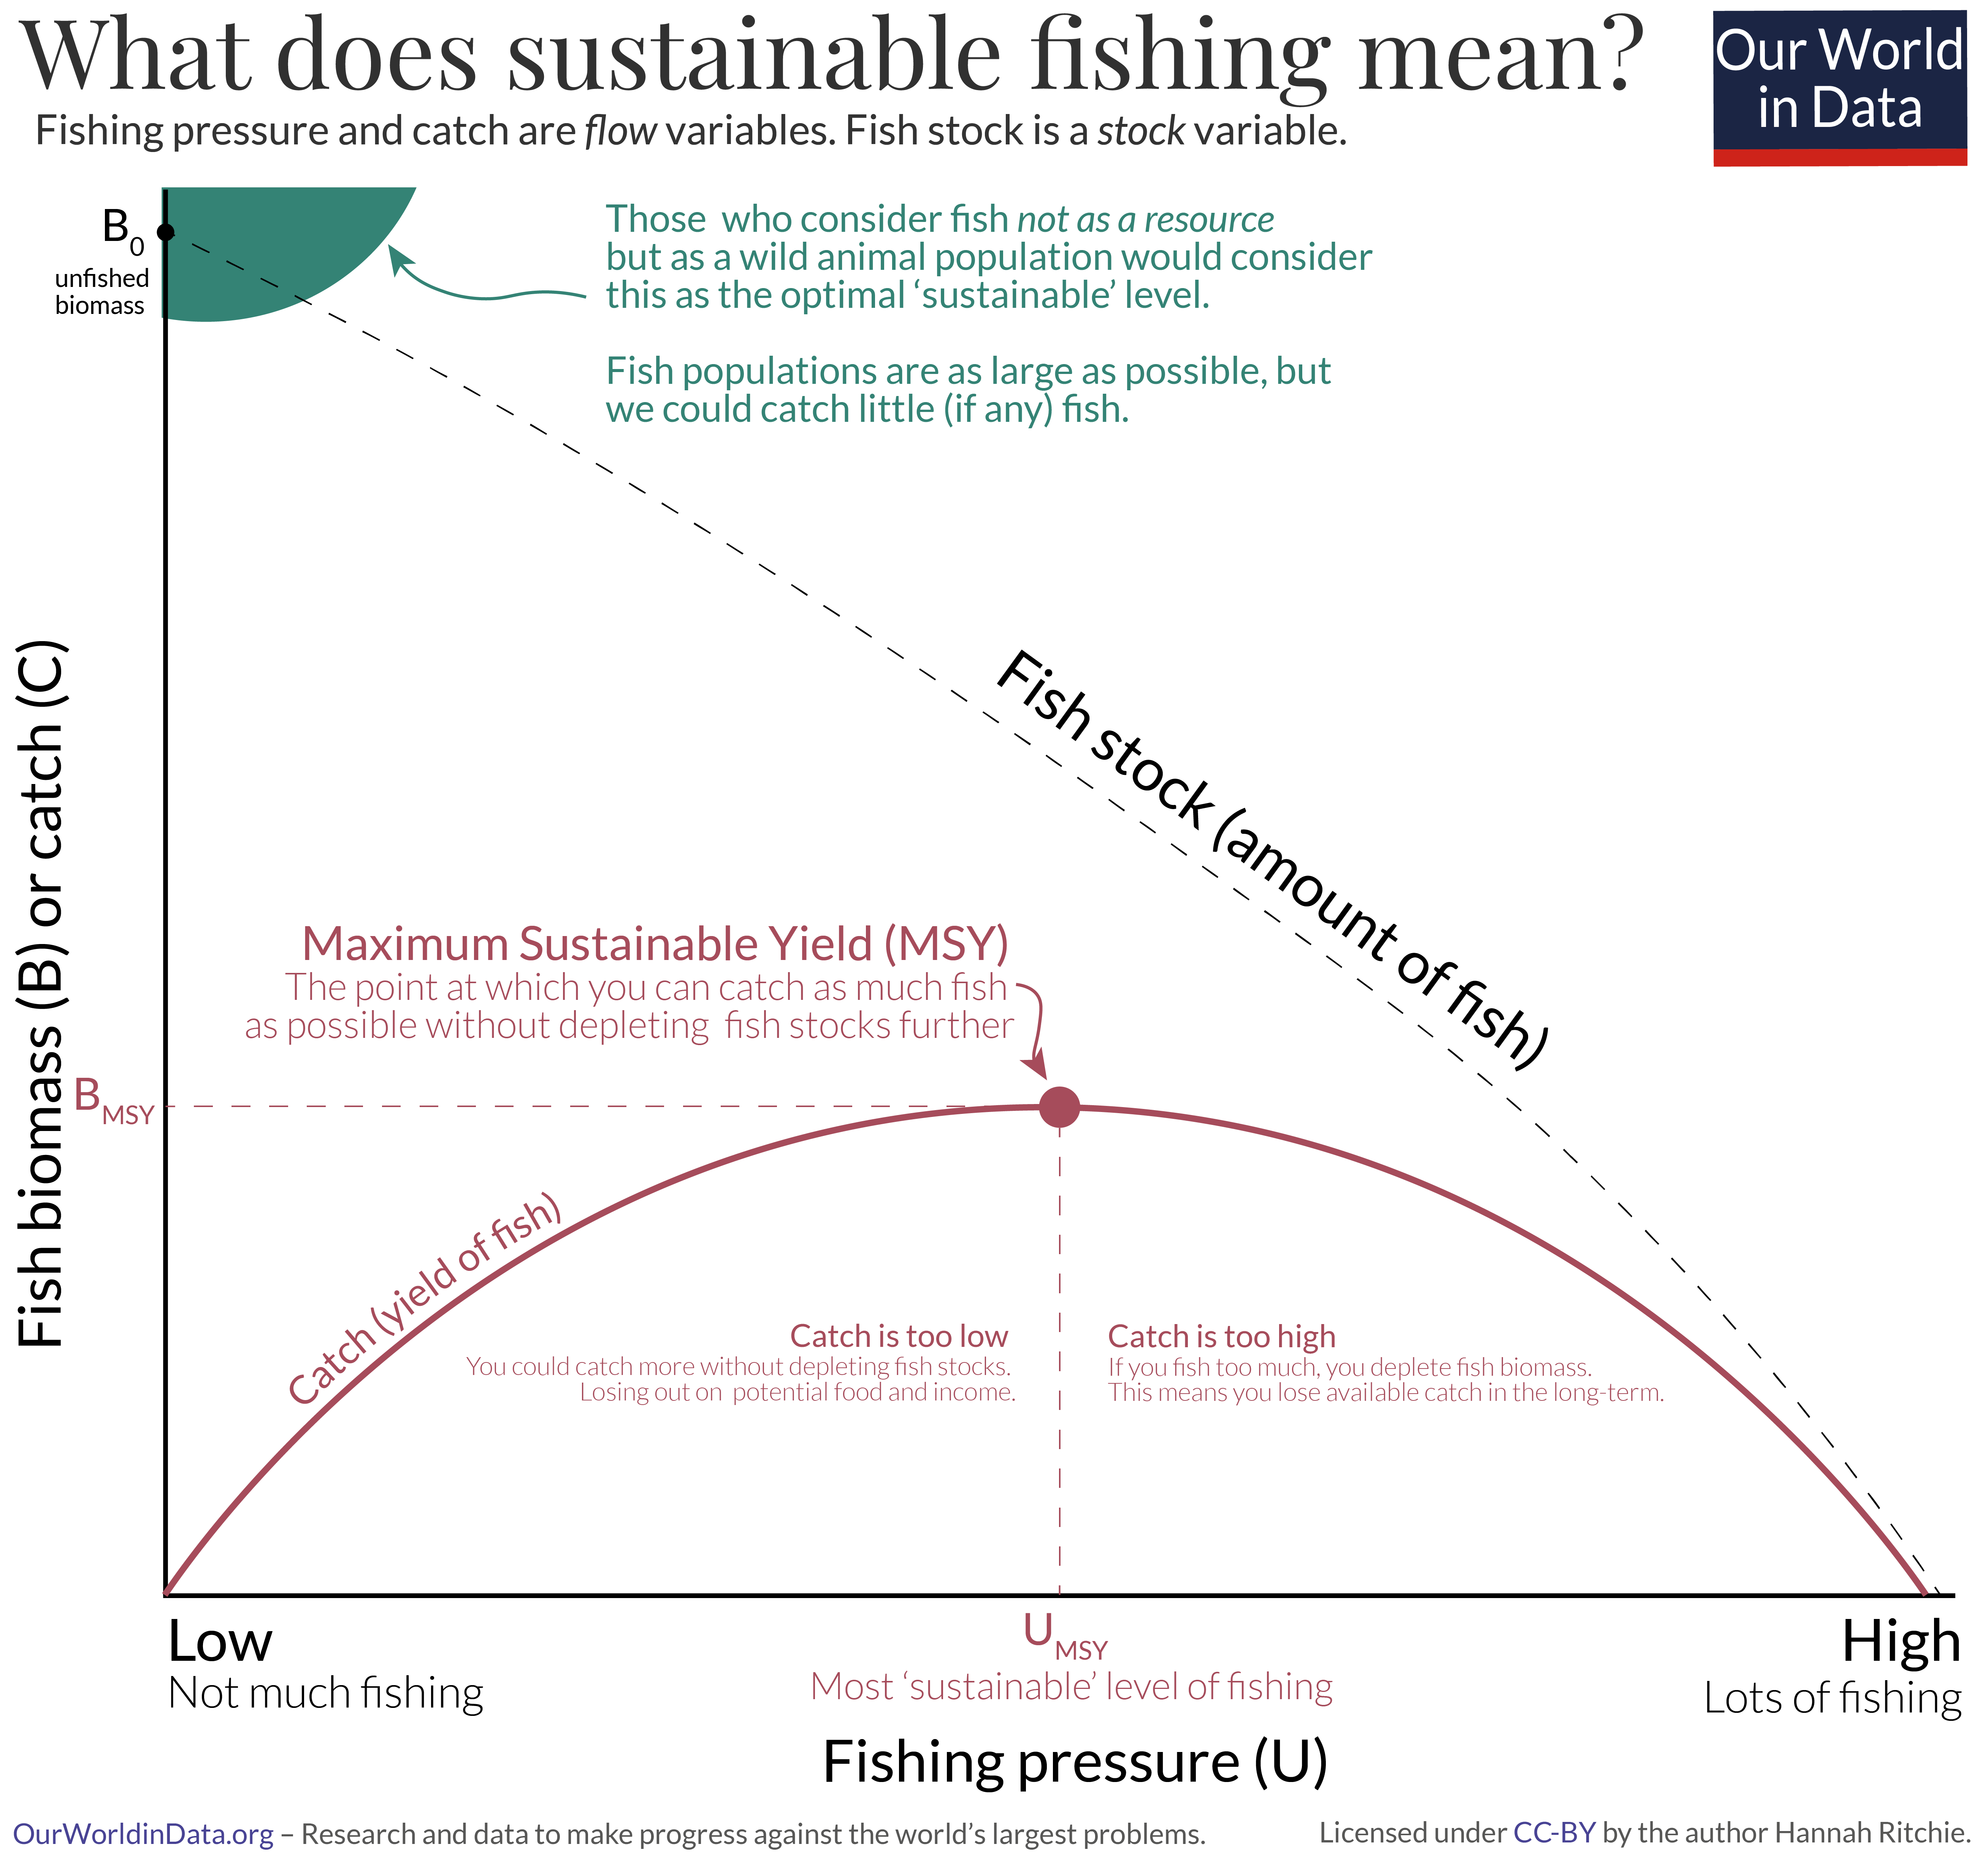 Fish and Overfishing - Our World in Data